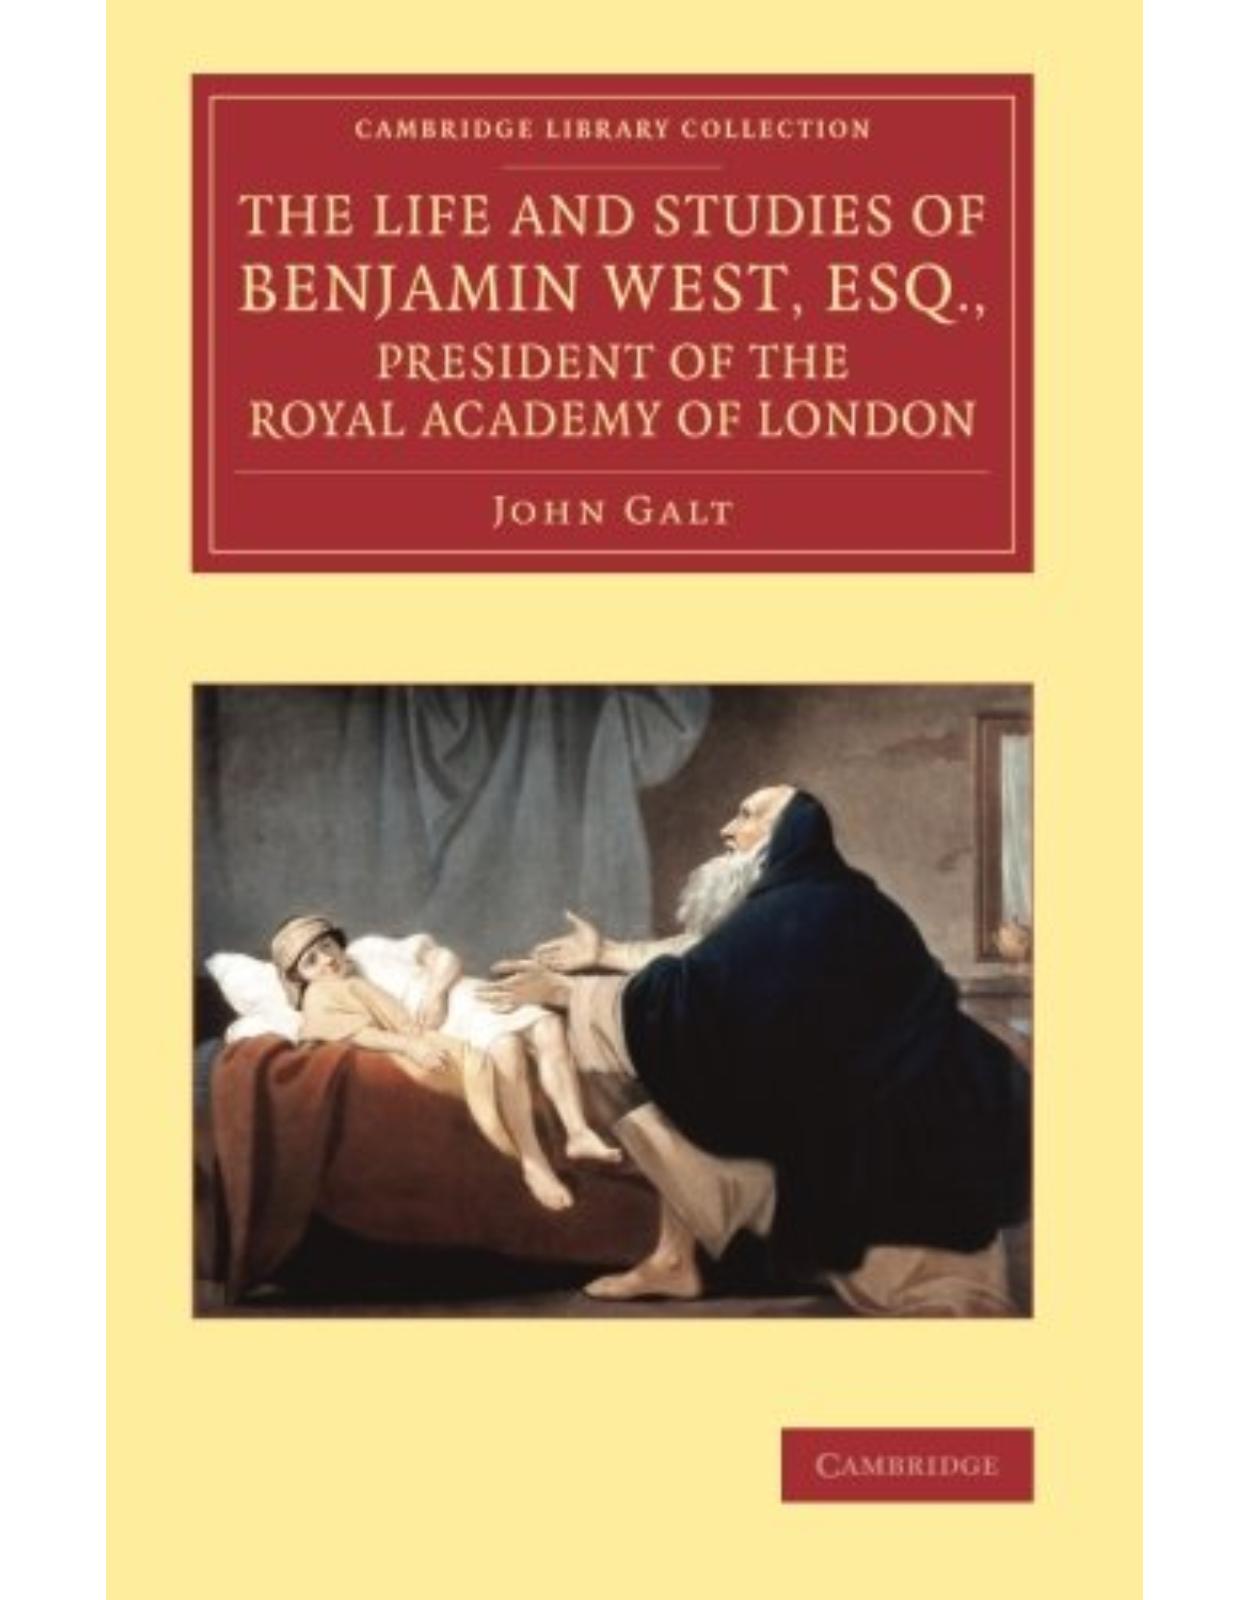 The Life and Studies of Benjamin West, Esq., President of the Royal Academy of London (Cambridge Library Collection - Art and Architecture)